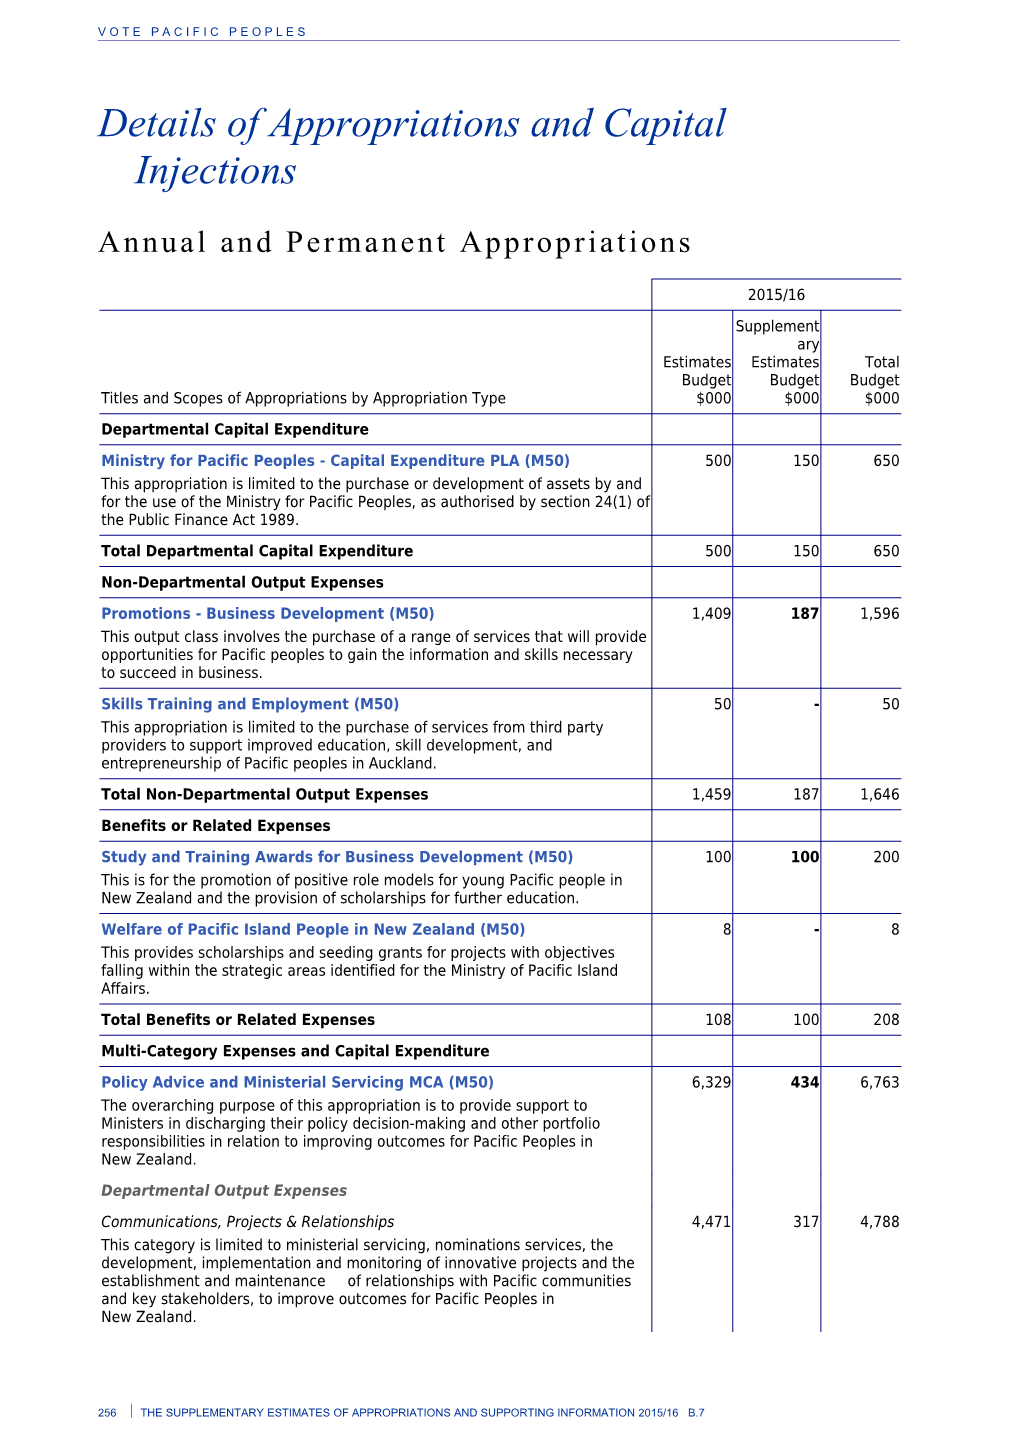 Vote Pacific People - Supplementary Estimates of Appropriations 2015/16 - Budget 2016